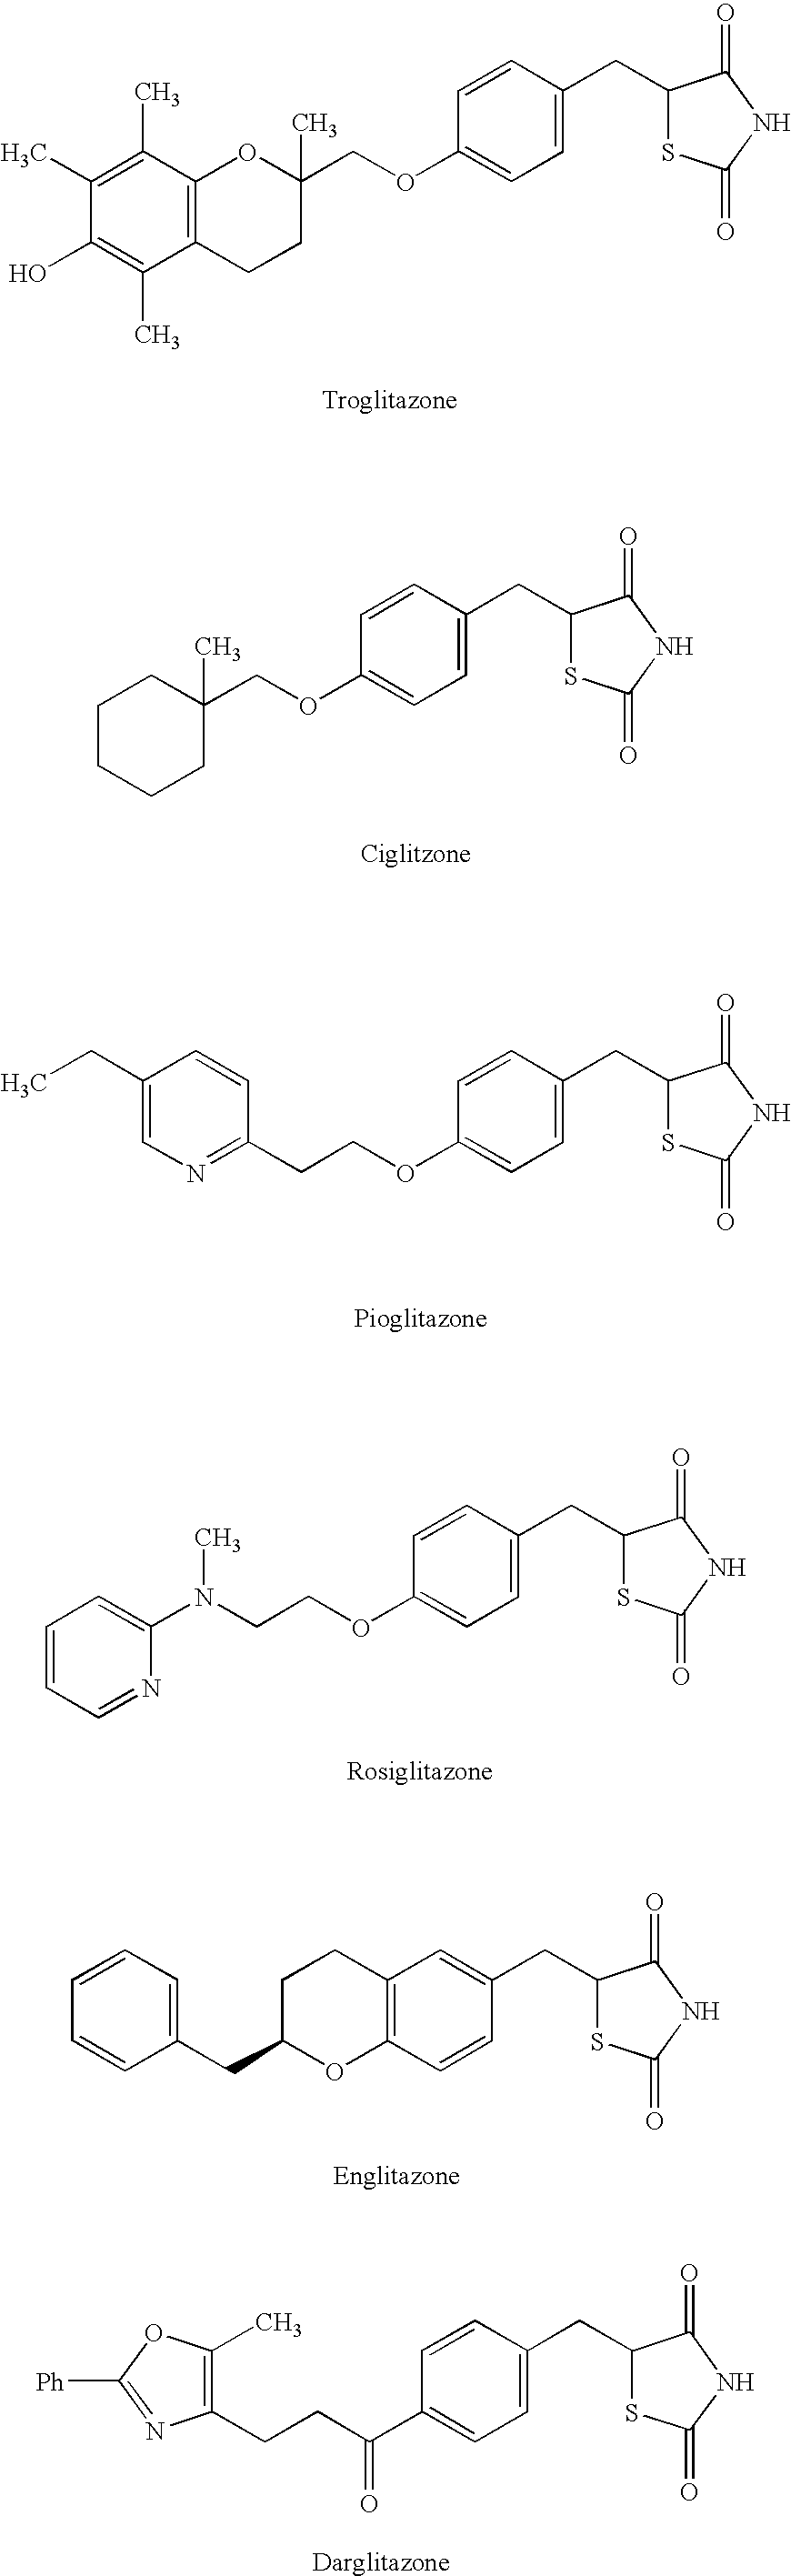 Oxy substituted chalcones as antihyperglycemic and antidyslipidemic agents